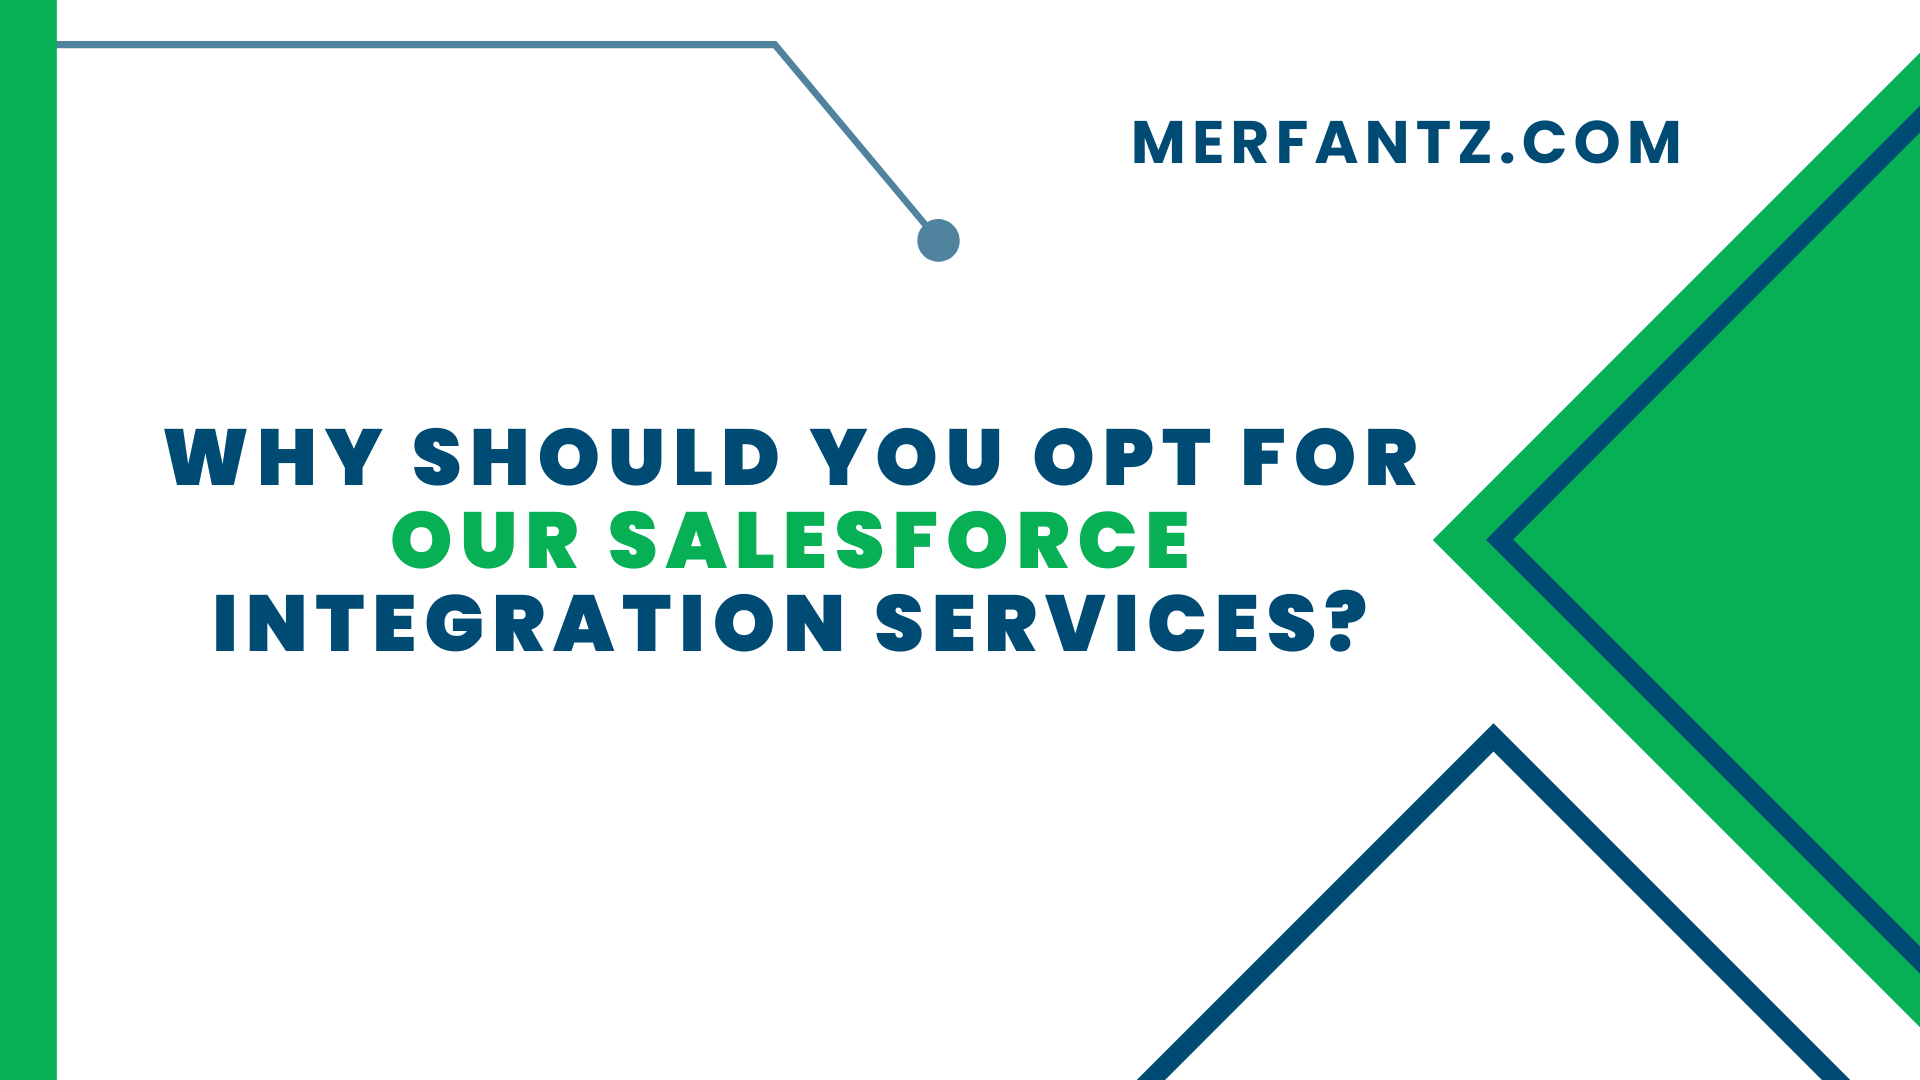 Why Should You Opt for Our Salesforce Integration Services